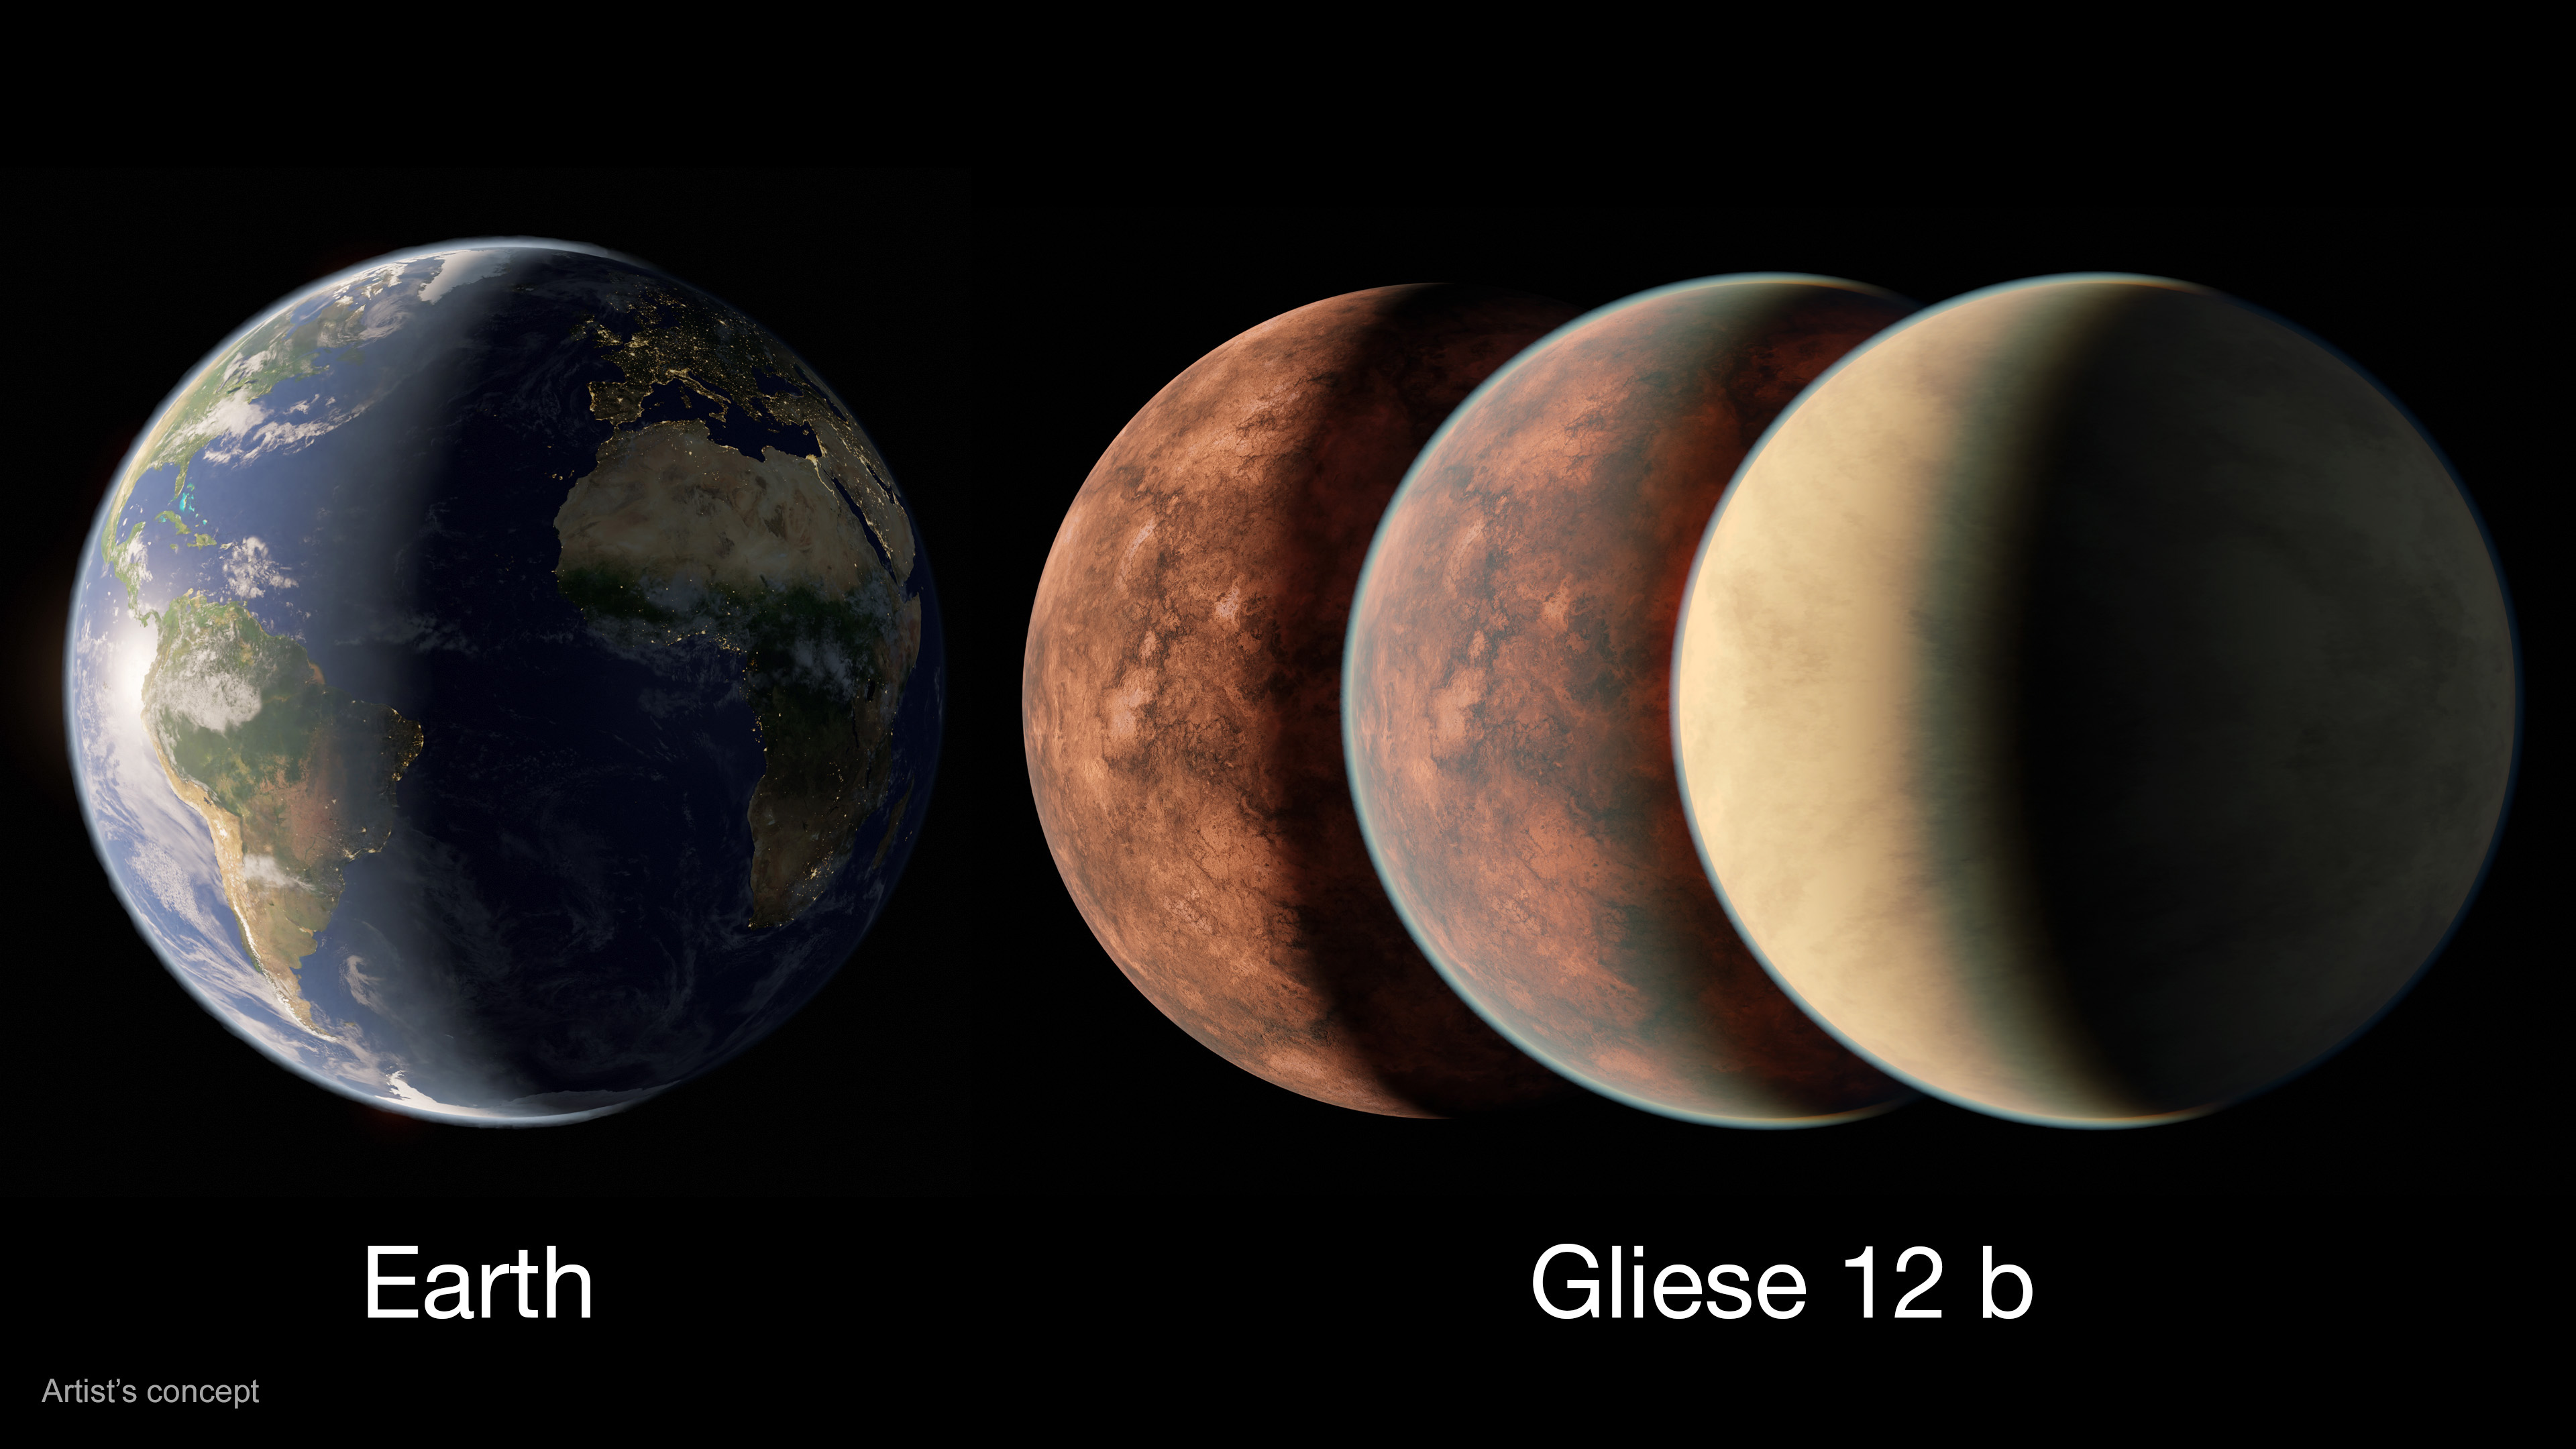 Illustration comparing Gliese 12 b models to Earth